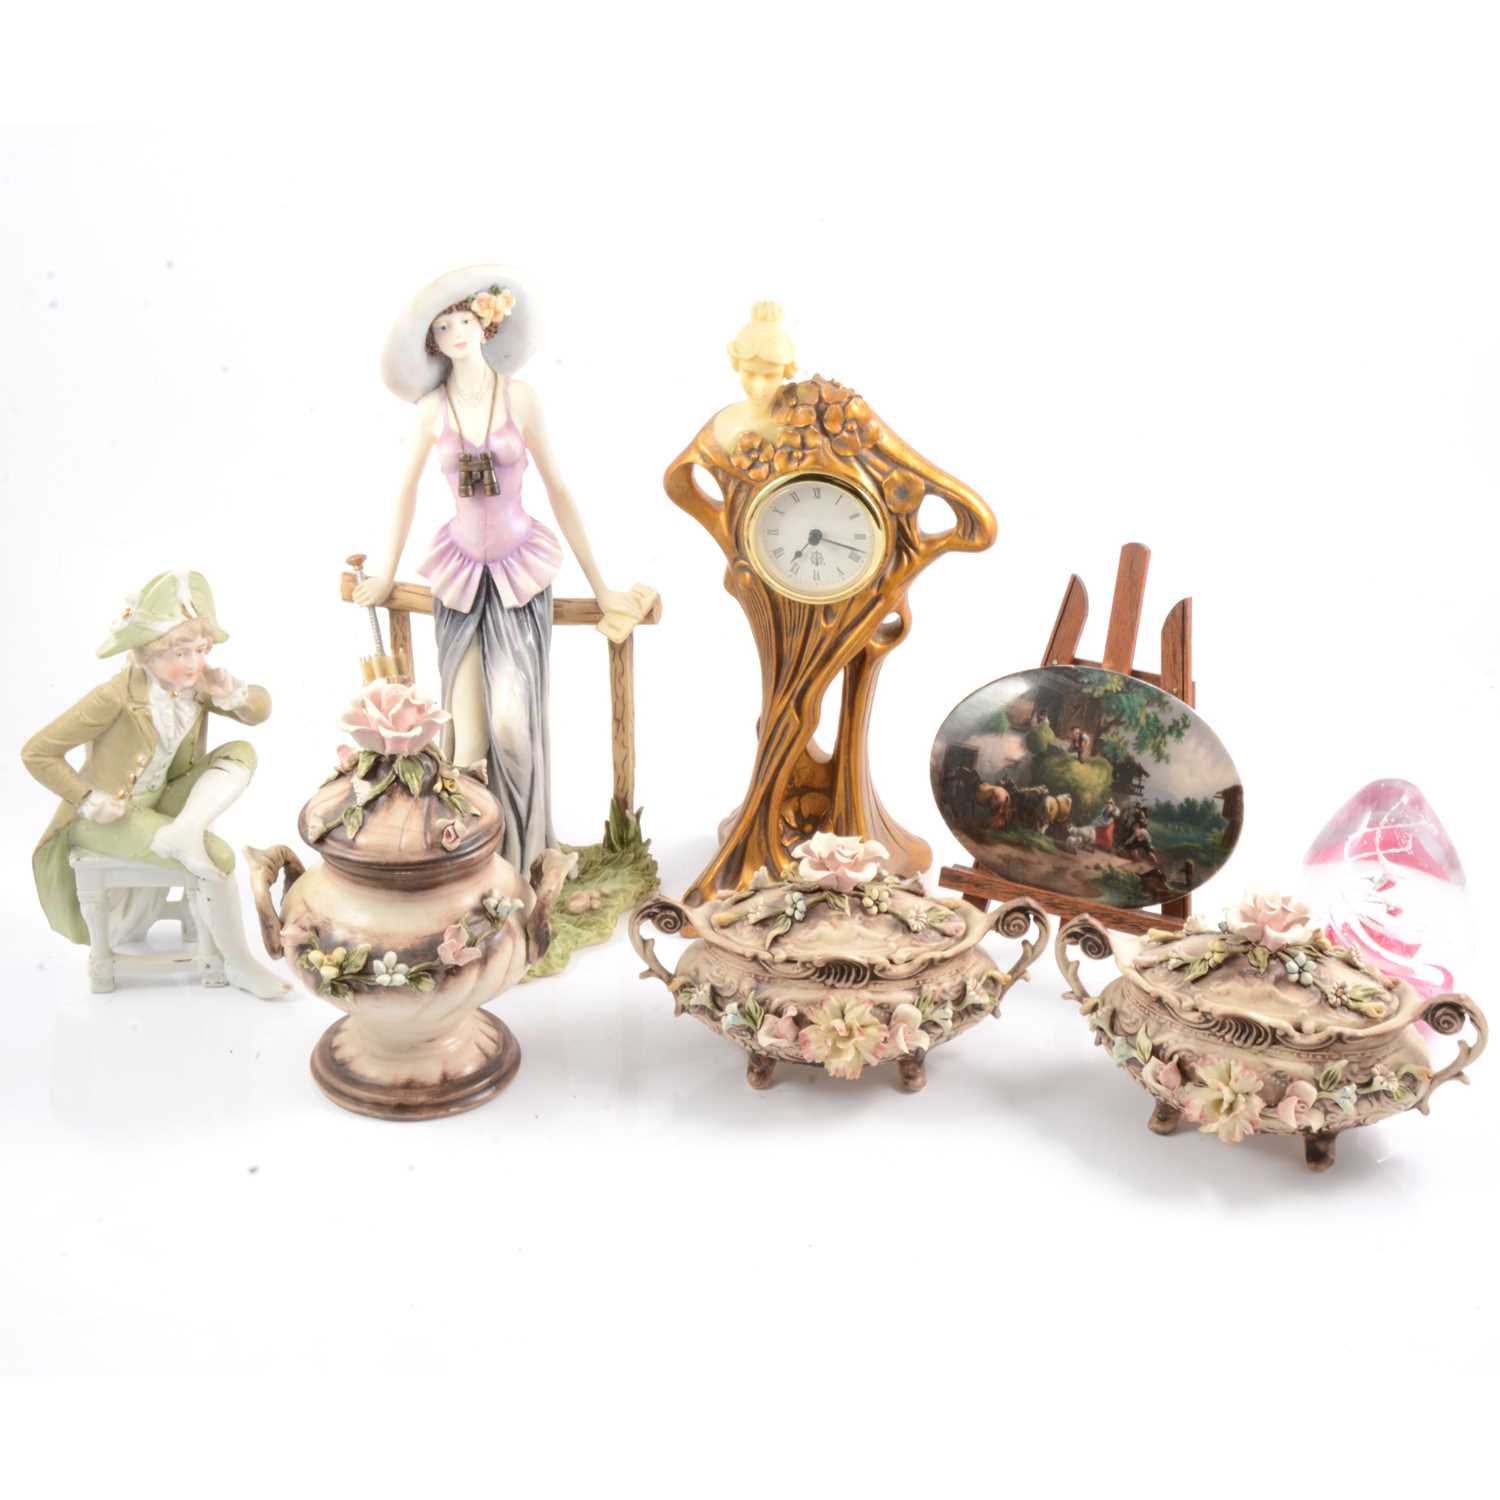 Lot 34 - Pair of small Dresden porcelain figurines, Capodimonte and other decorative items.